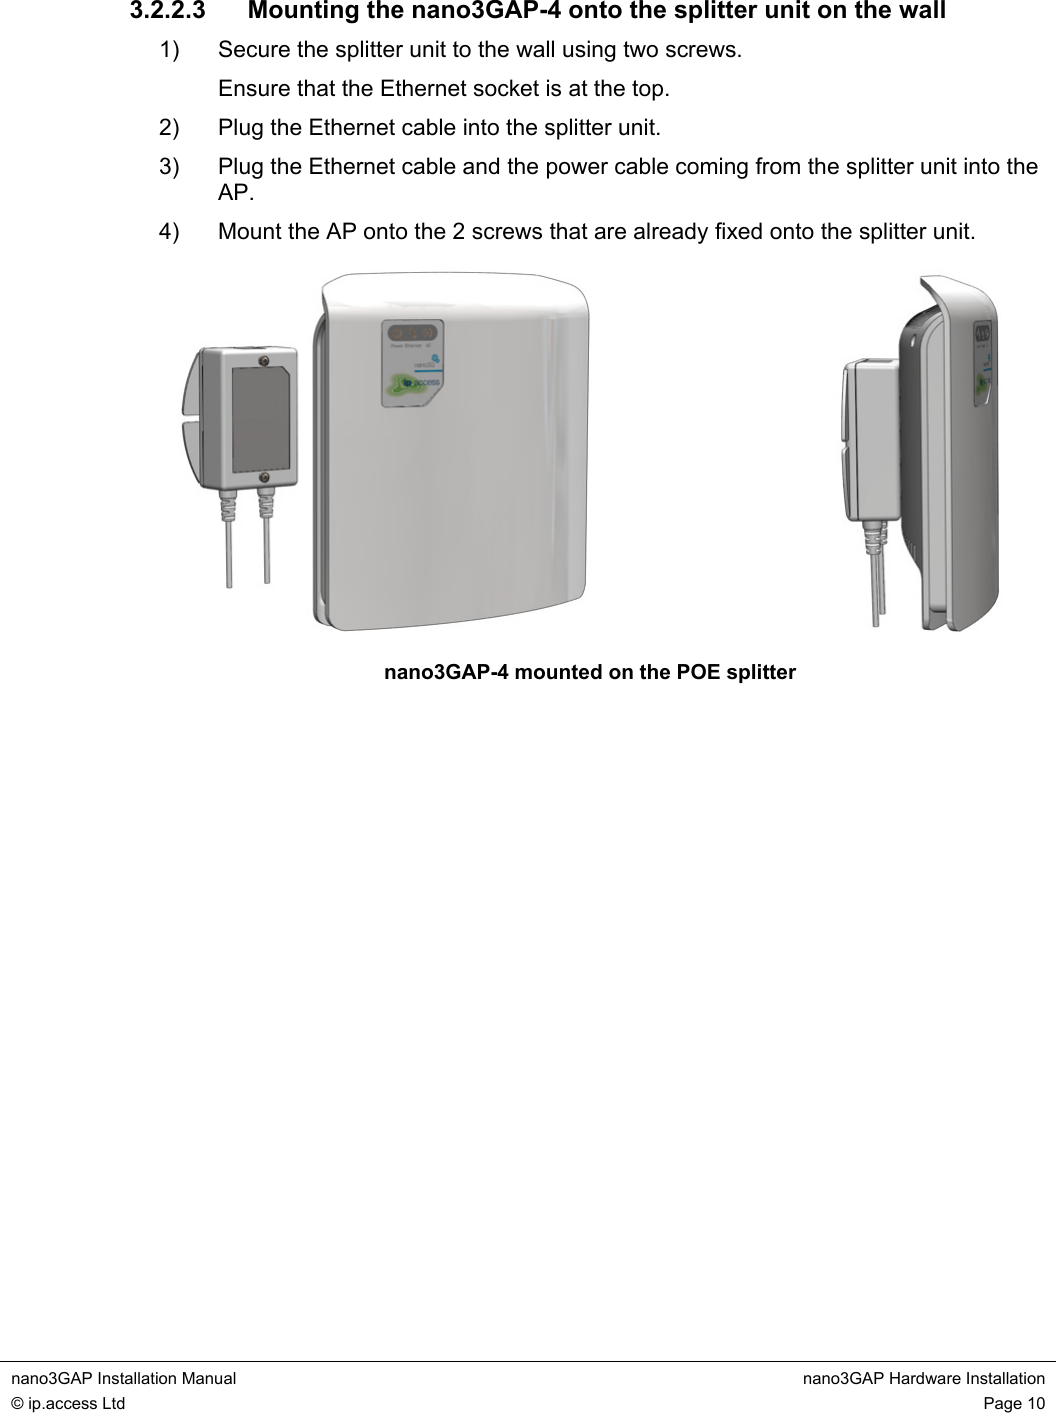  nano3GAP Installation Manual  nano3GAP Hardware Installation © ip.access Ltd  Page 10  3.2.2.3  Mounting the nano3GAP-4 onto the splitter unit on the wall 1)  Secure the splitter unit to the wall using two screws. Ensure that the Ethernet socket is at the top. 2)  Plug the Ethernet cable into the splitter unit. 3)  Plug the Ethernet cable and the power cable coming from the splitter unit into the AP. 4)  Mount the AP onto the 2 screws that are already fixed onto the splitter unit.    nano3GAP-4 mounted on the POE splitter  